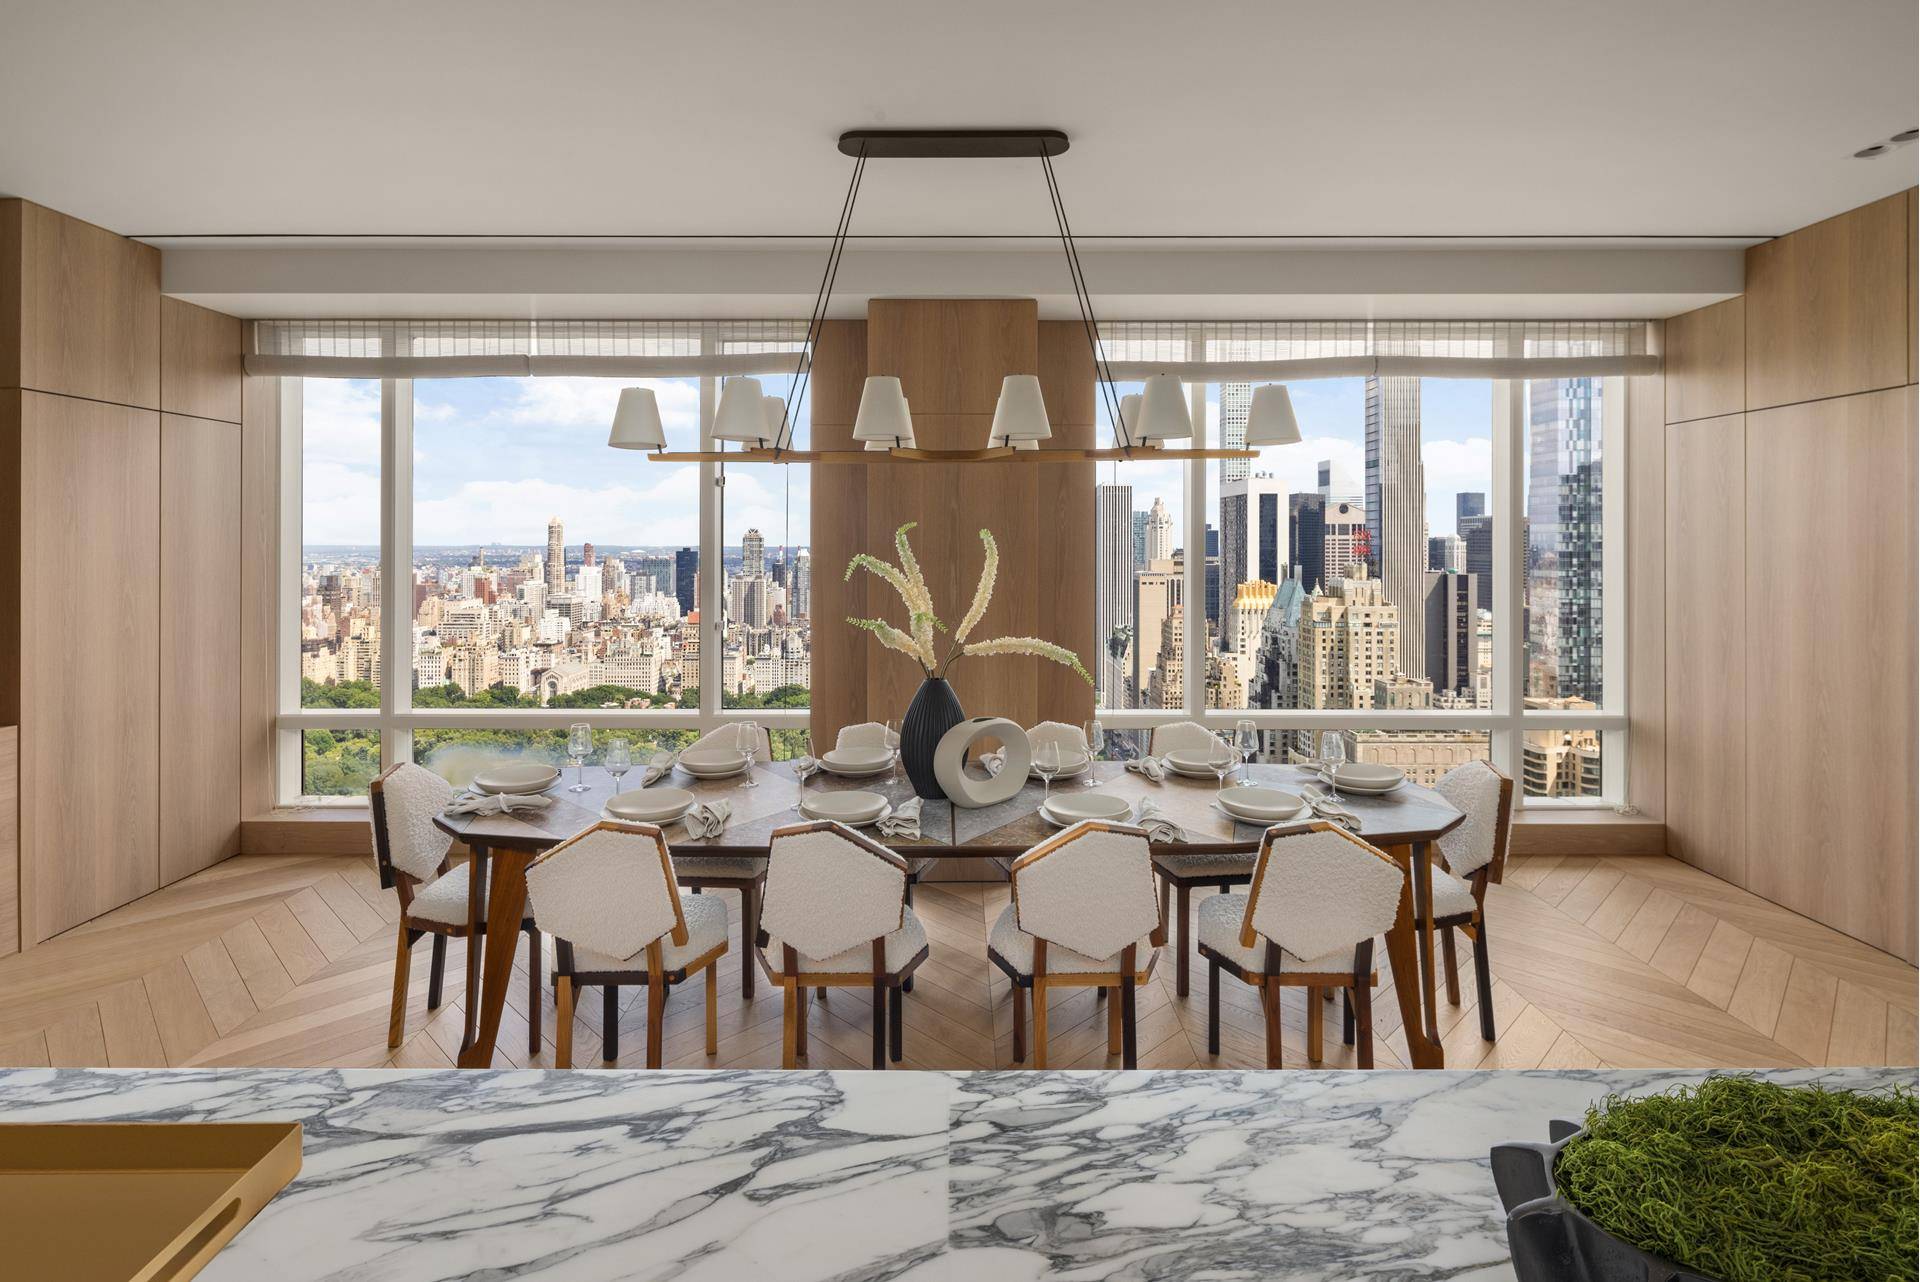 Beautifully renovated and never lived in, this 5 bedroom, 6 bathroom residence at 1 Central Park West offers graceful design and commanding views of Central Park.